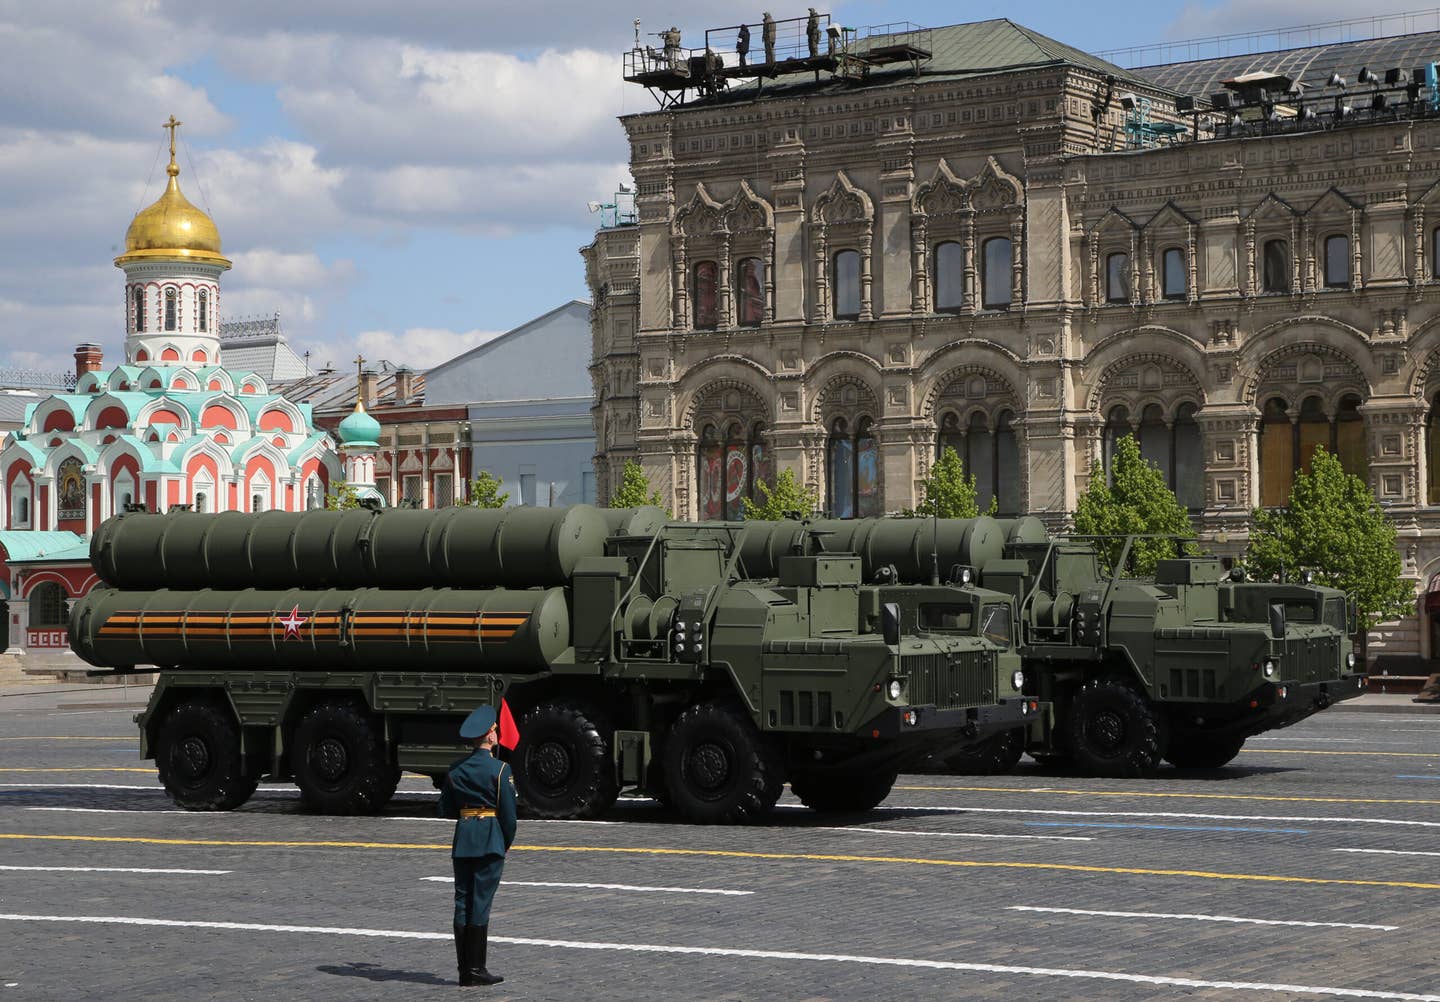 The S-400 Triumph surface-to-air missile system (NATO reporting name: SA-21 Growler) is part of Russia's robust integrated air defenses. (Photo by Contributor/Getty Images)